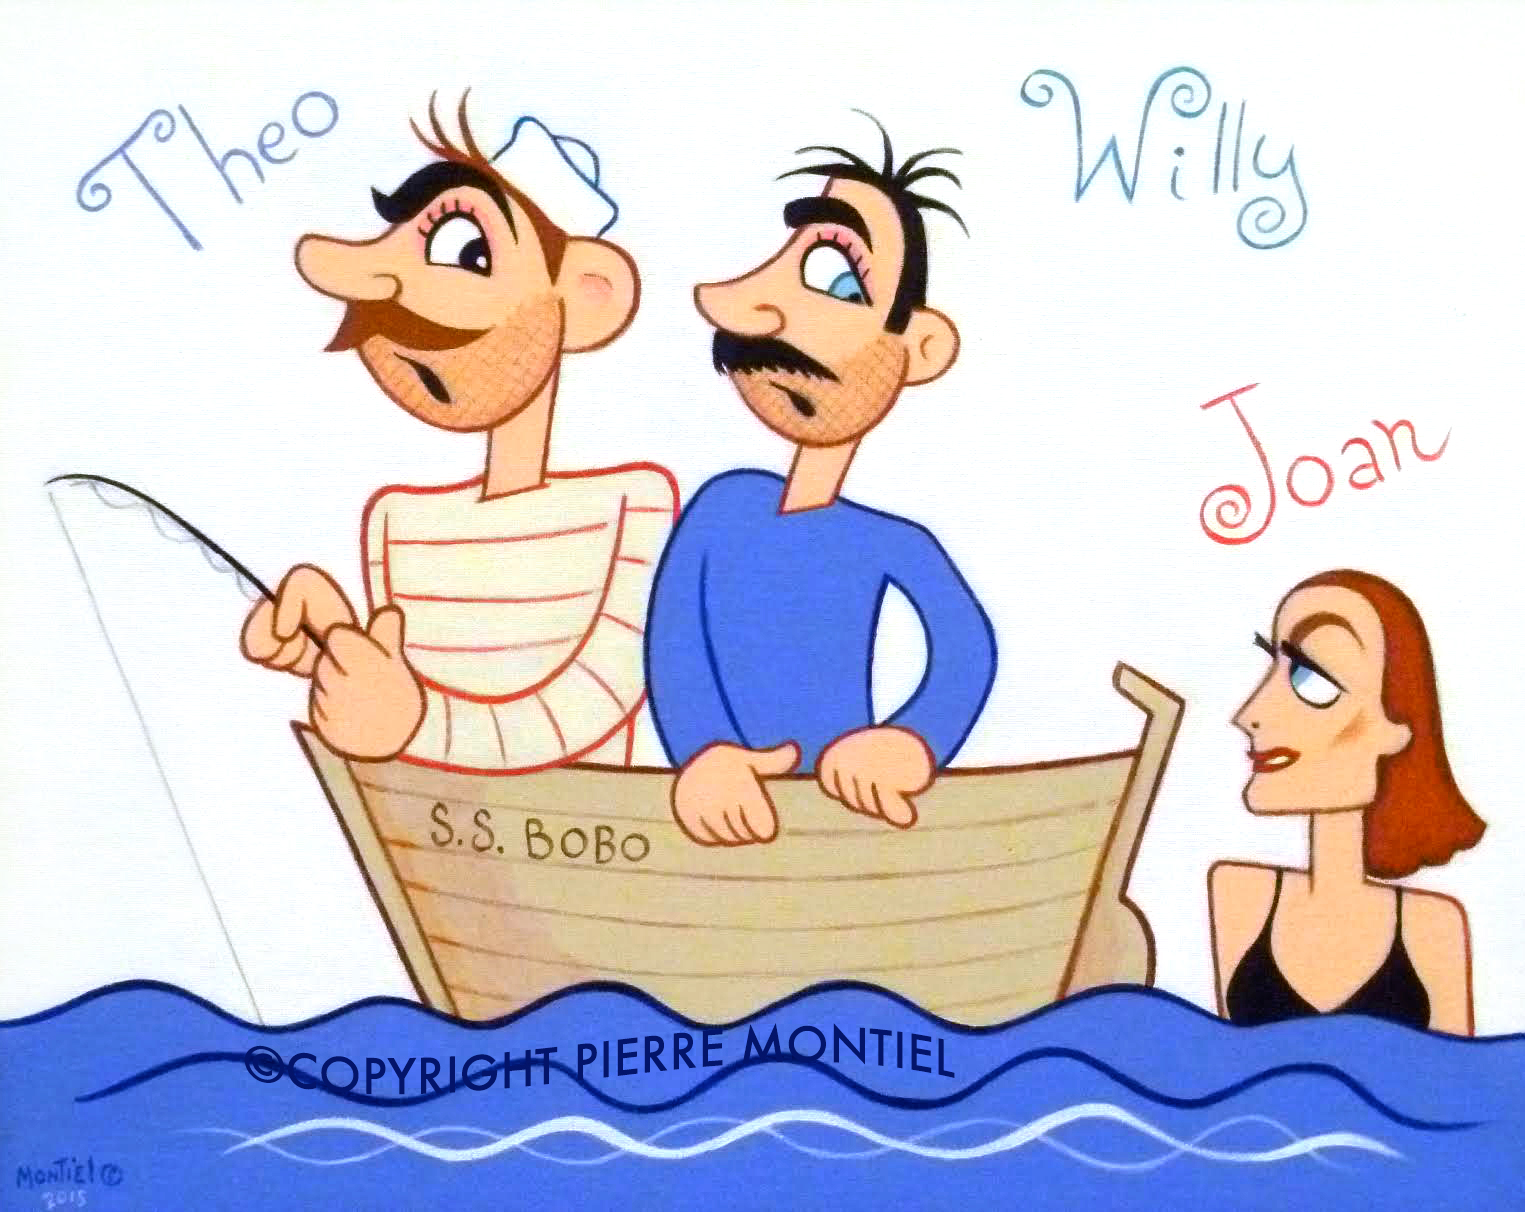 Theo, Willy and Joan